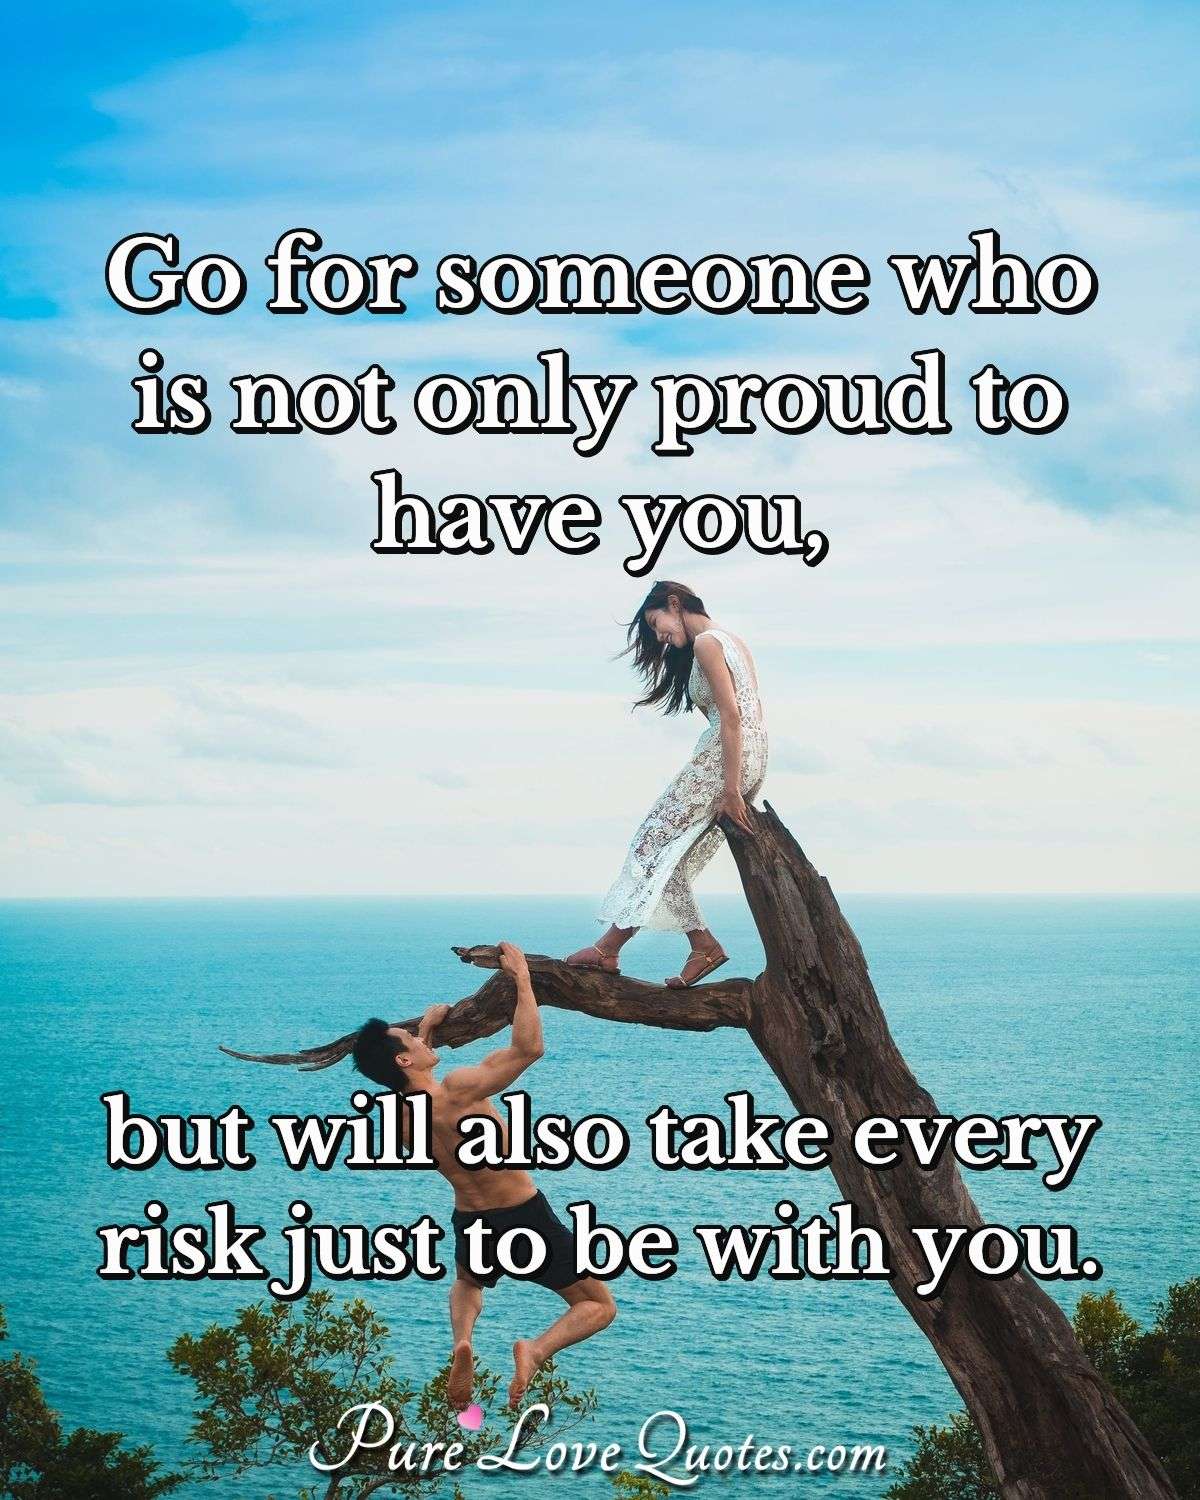 Go for someone who is not only proud to have you, but will also take every risk just to be with you. - Anonymous